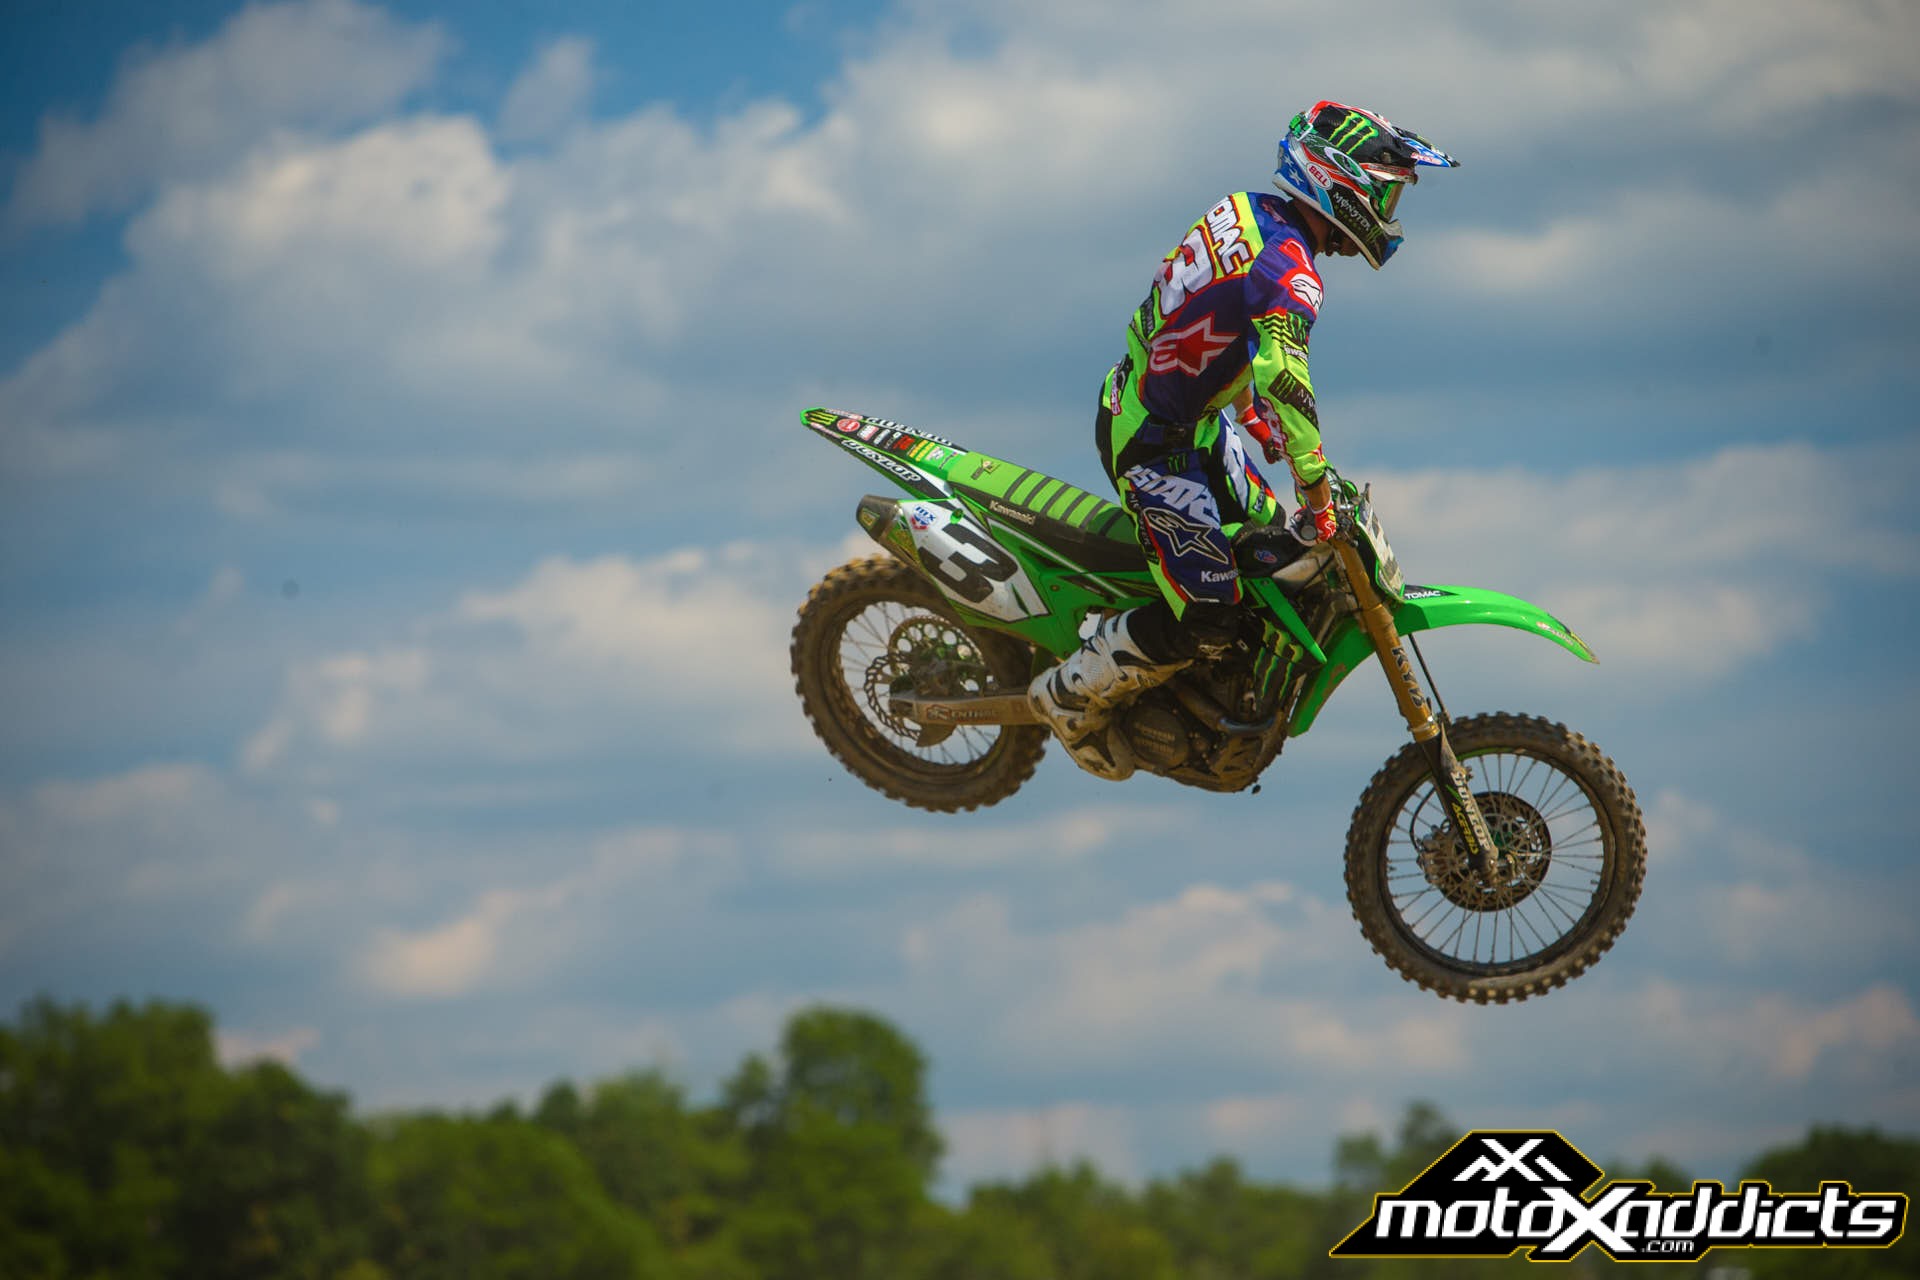 Eli Tomac finally saw the #94, but a mistake gave it an anticlimactic finish. 